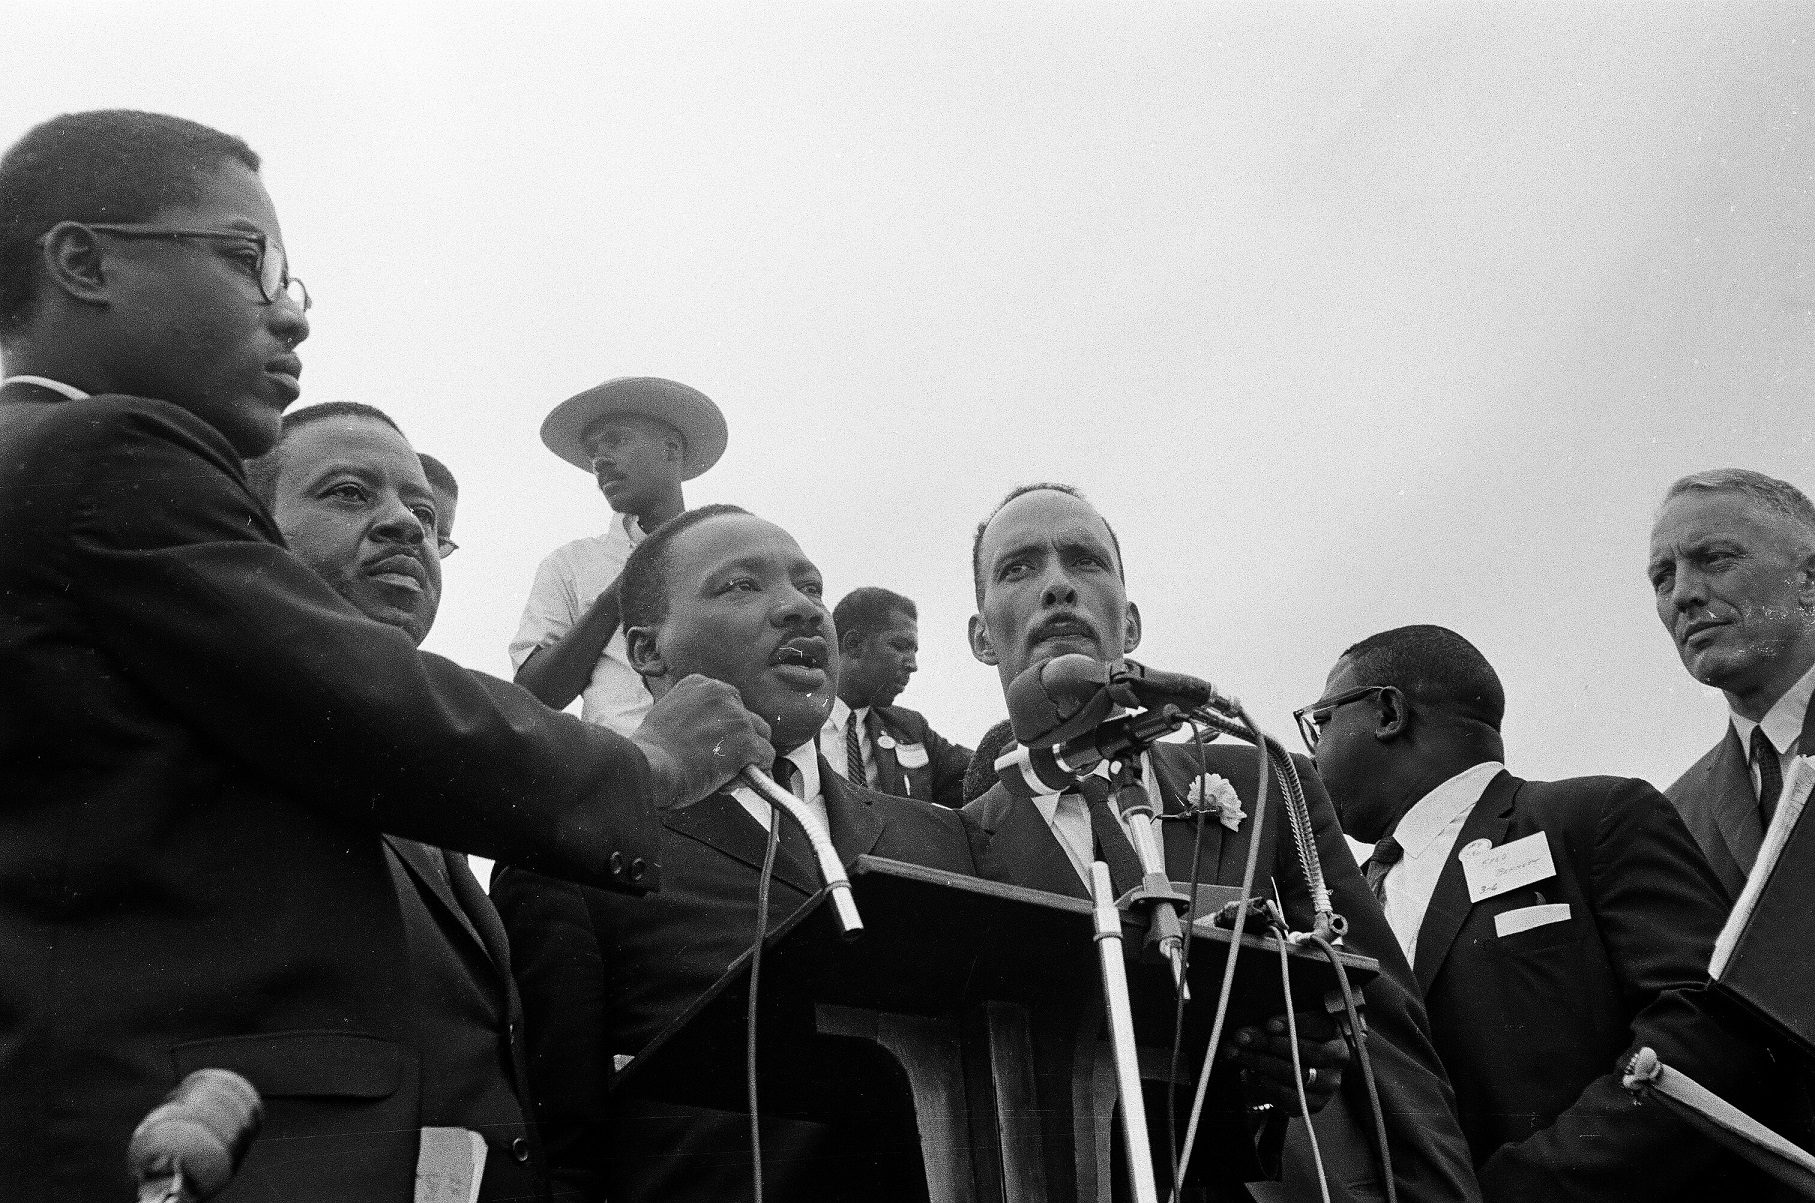 Martin Luther King, Jr. speaks to marchers